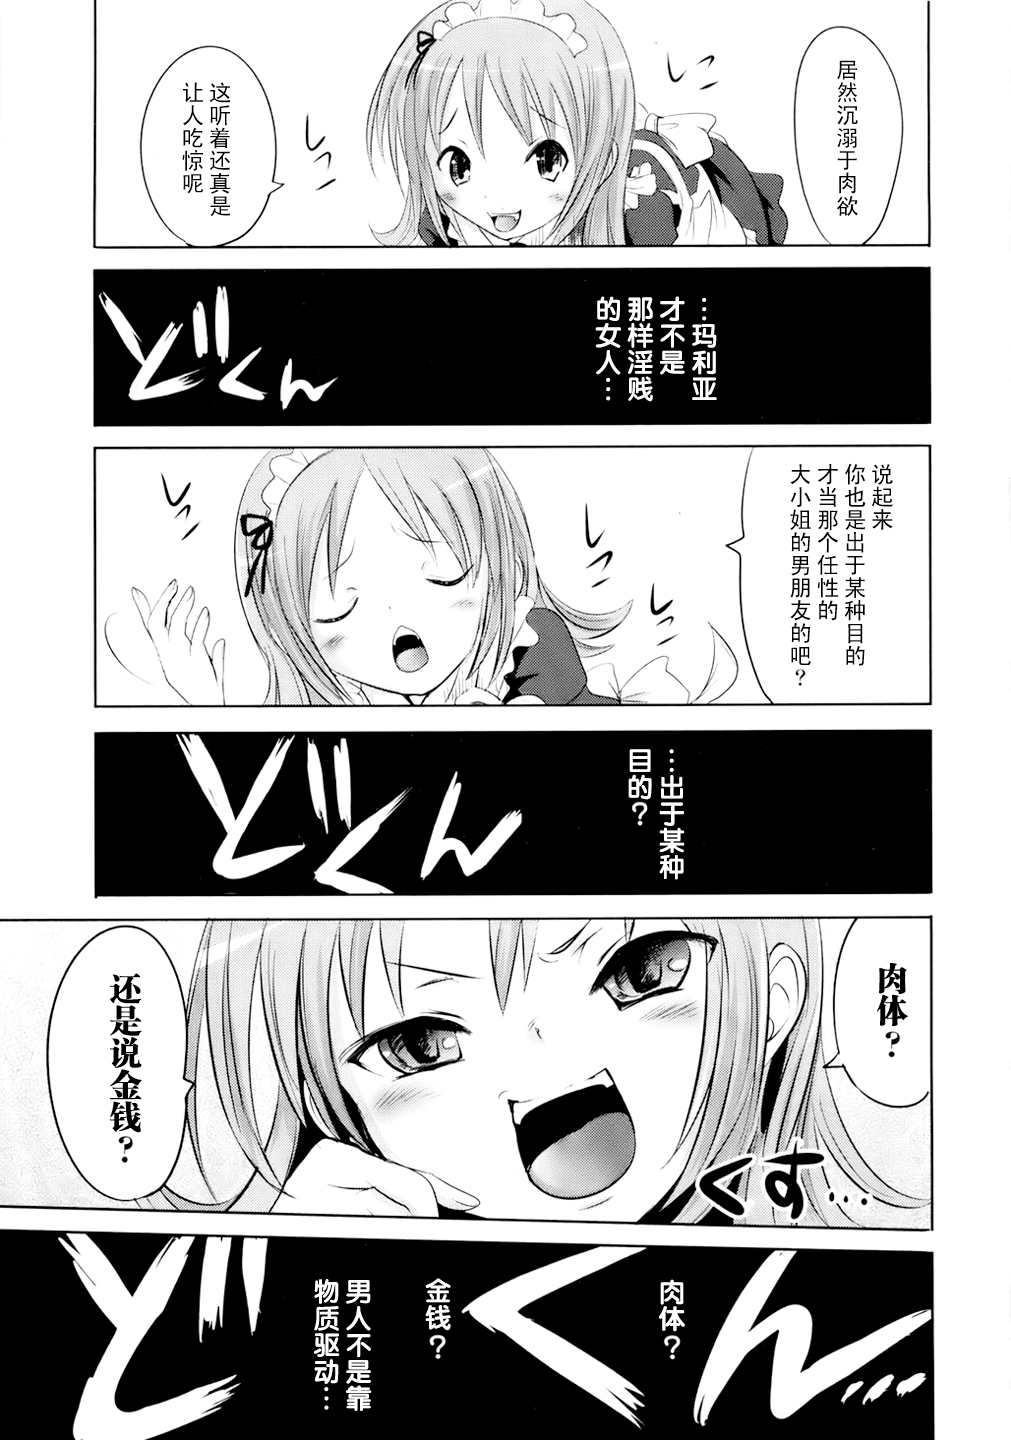 [Natsume Fumika] Sundere! Ch.5 [Chinese] [夏目文花] スンデレ! CH5[中文翻譯]